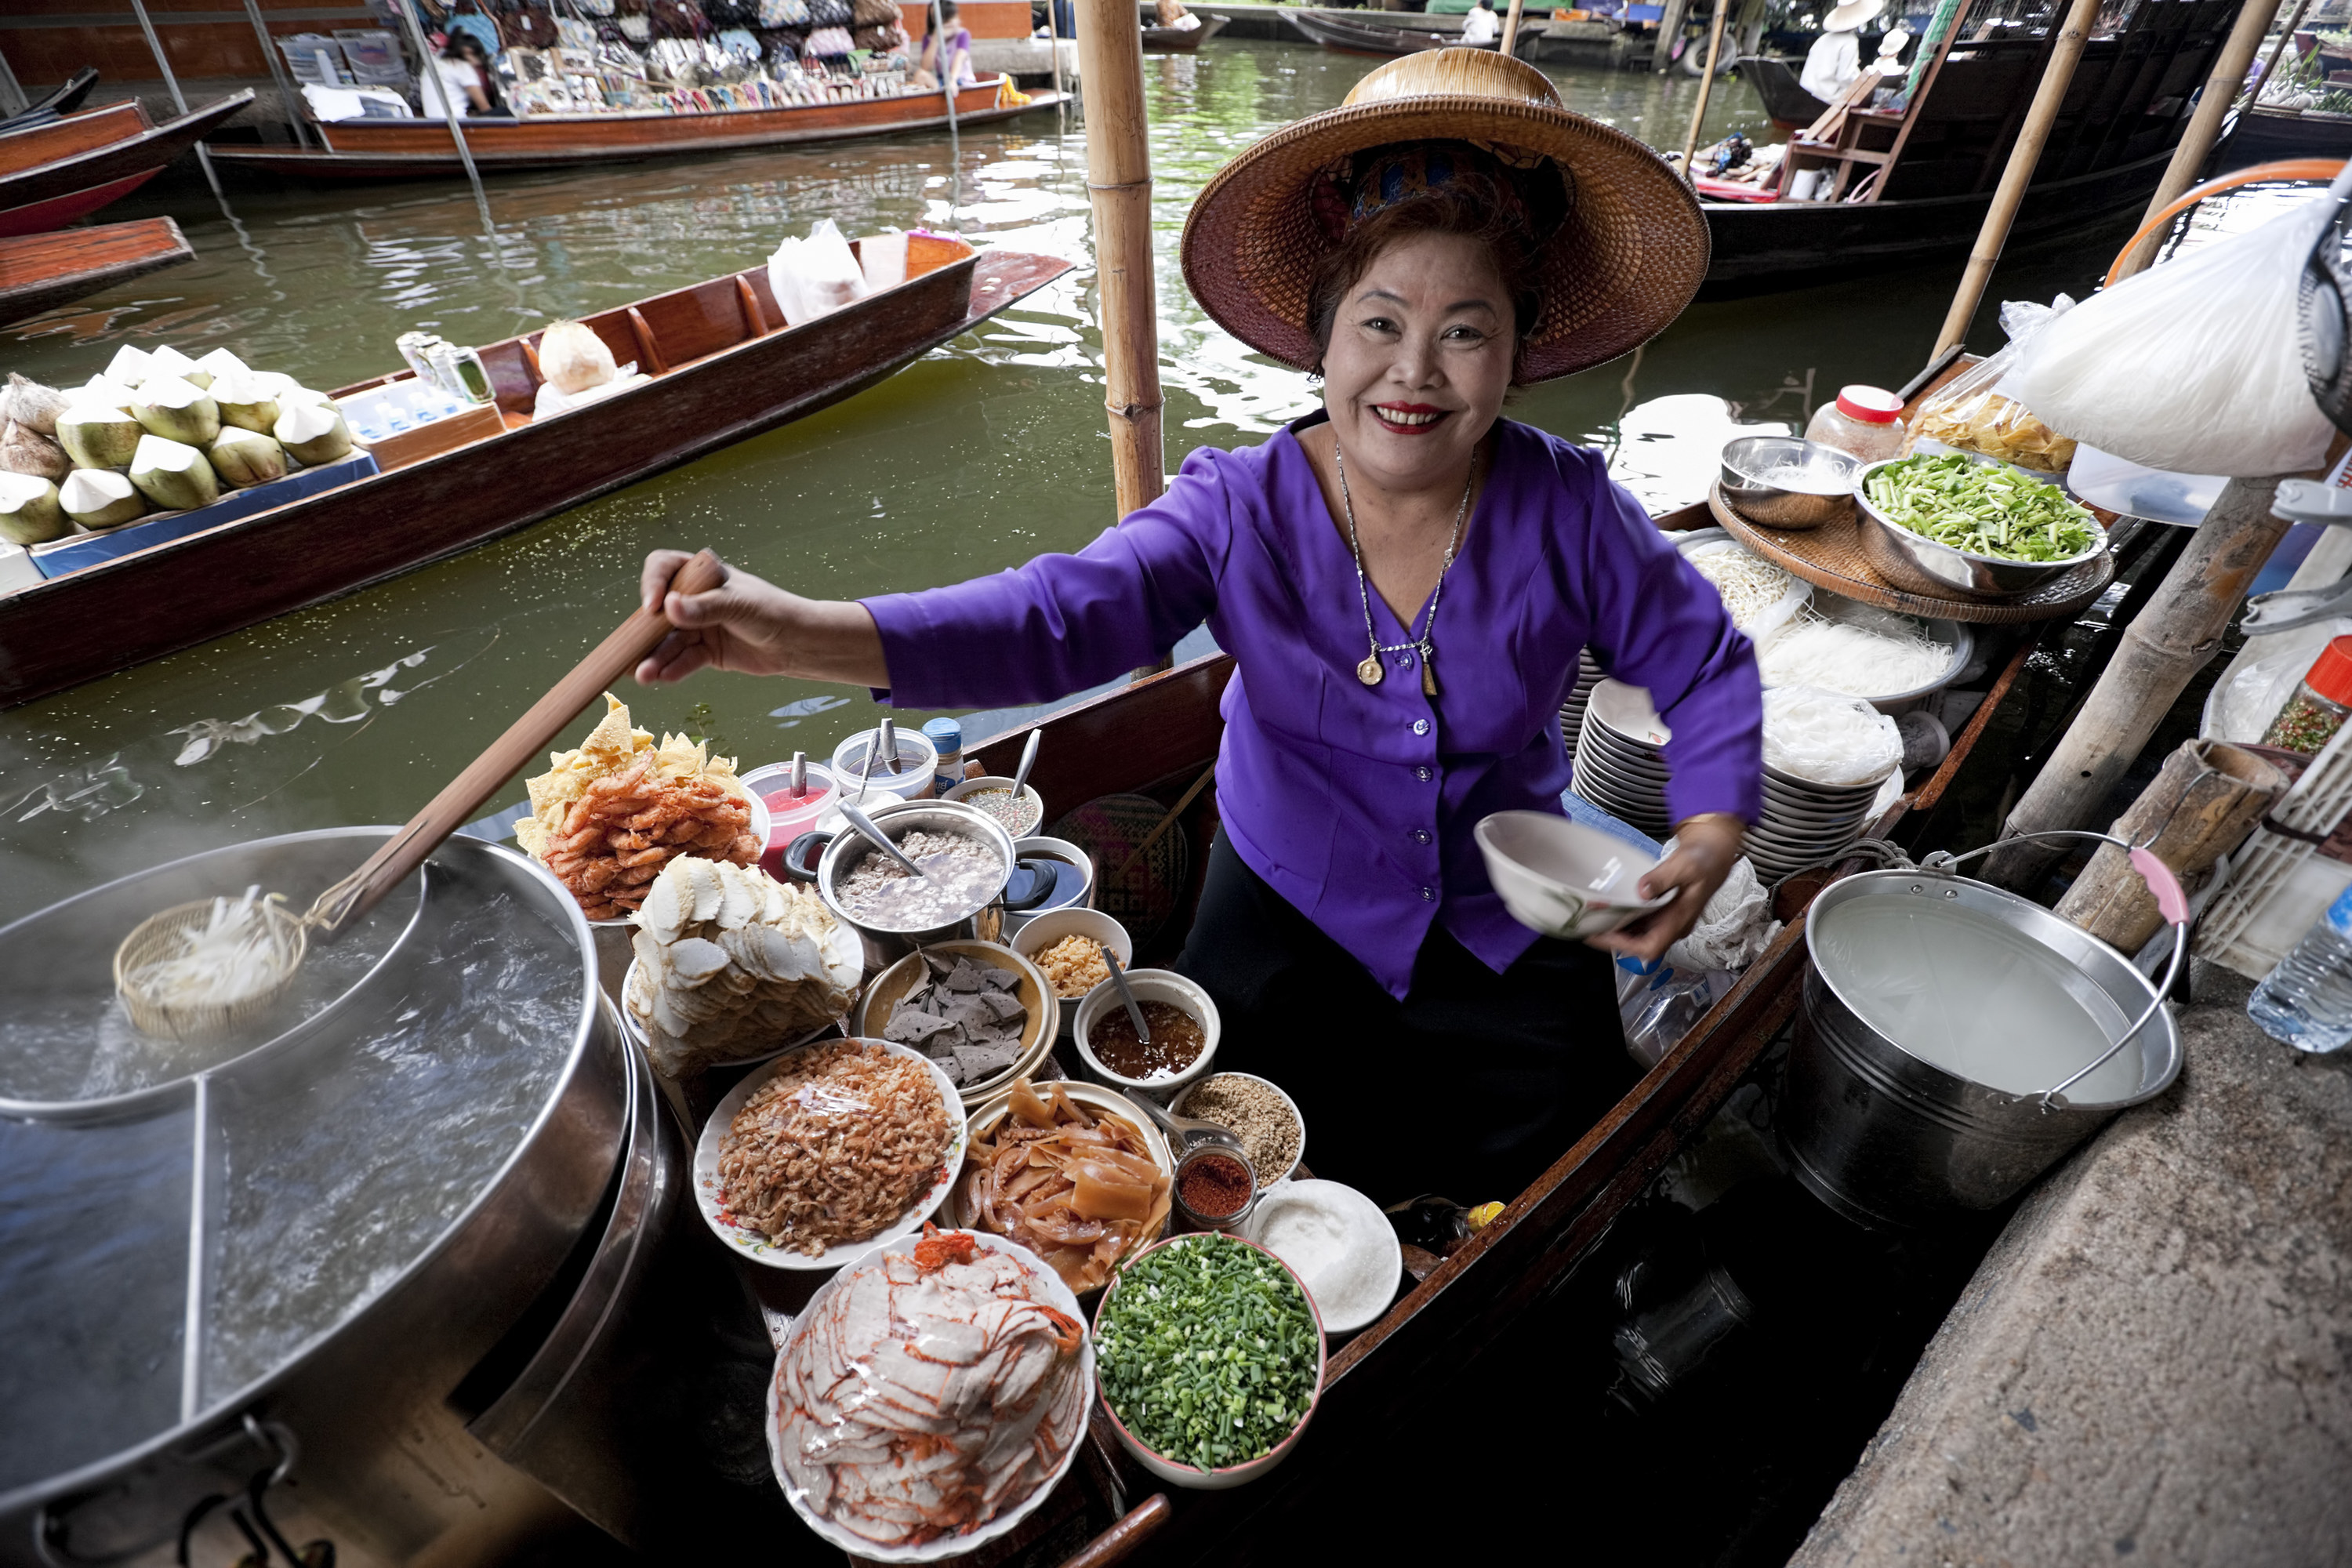 A street food-vending woman smiles broadly at the camera. She is surrounded by various ingredients and holds a serving of noodles